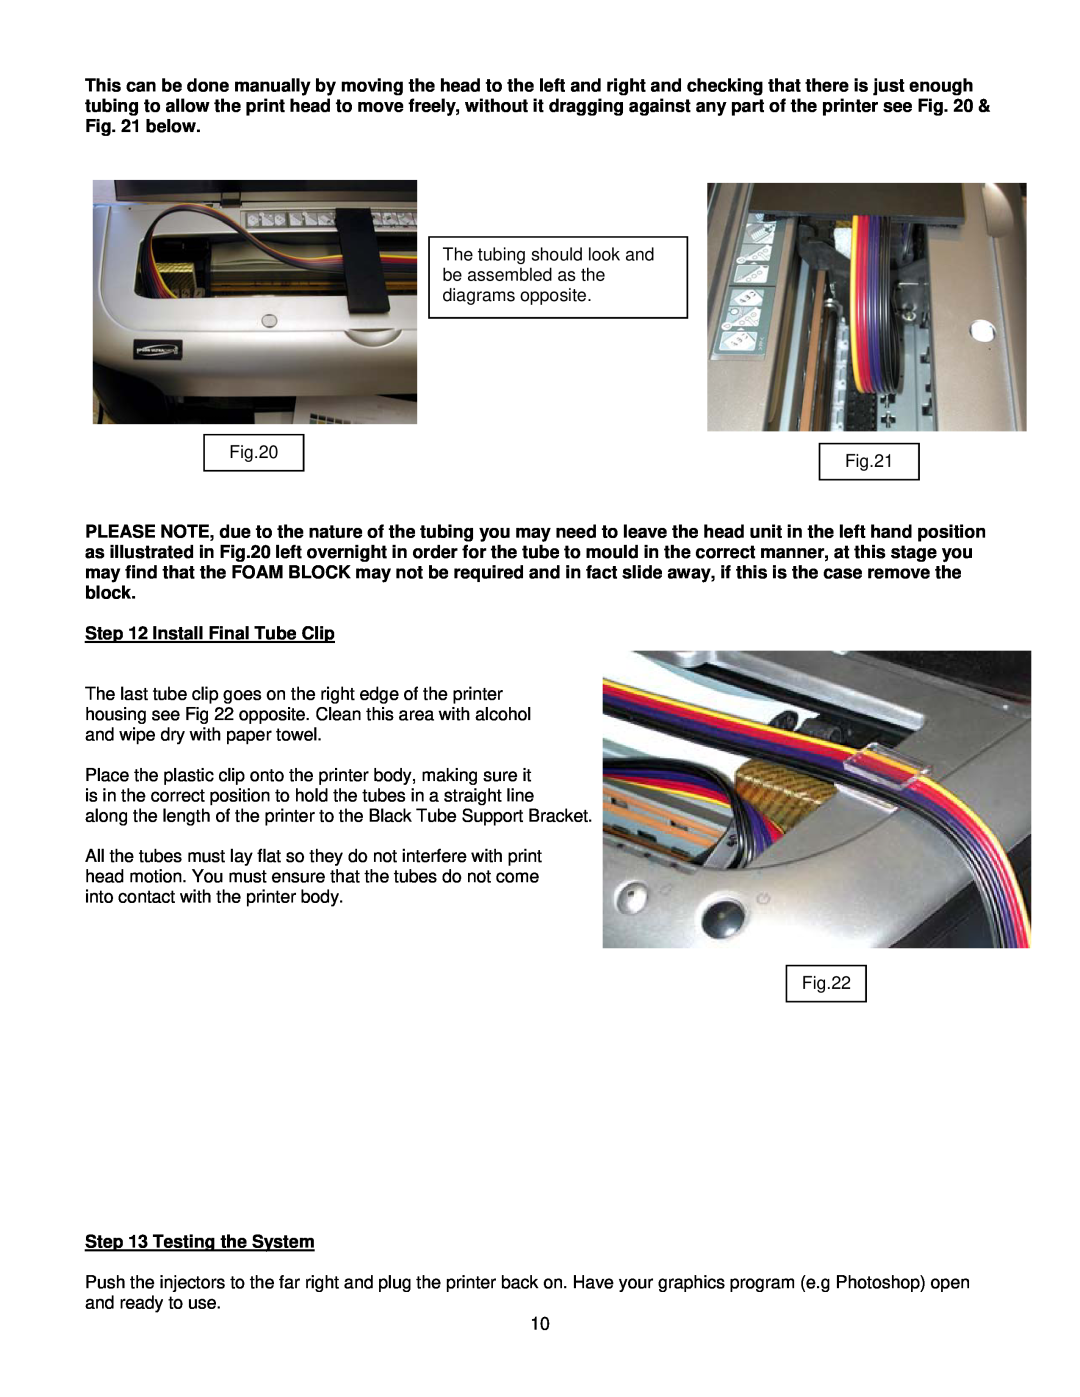 Epson 2100 installation instructions Install Final Tube Clip, Testing the System 